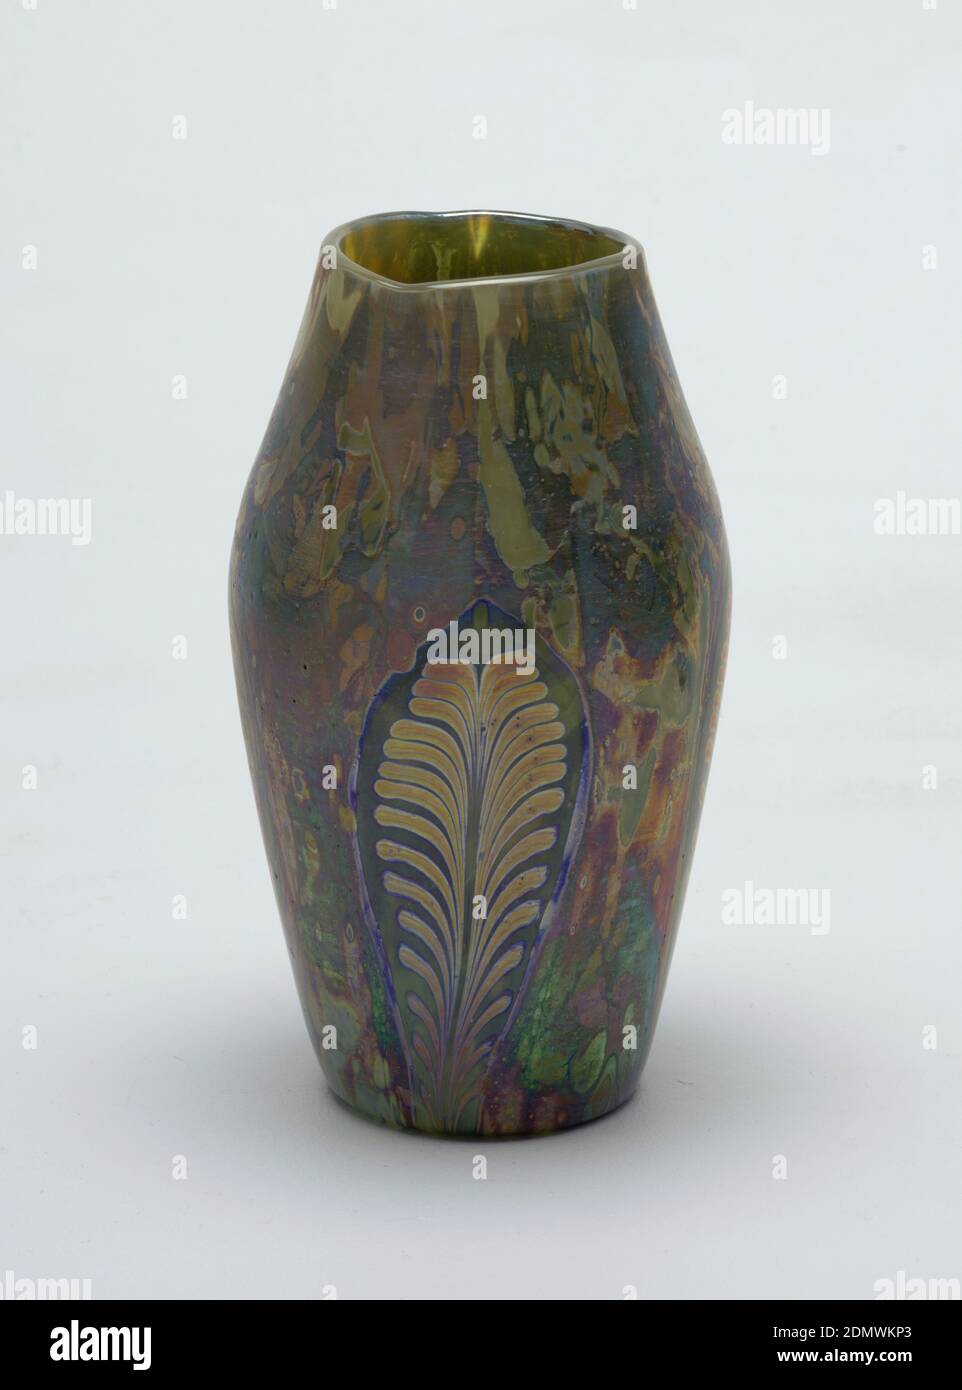 Cypriote, Tiffany & Company, American, established 1853, Blown glass, Blown  'Cypriote' ware vase with curved shoulder. Neck tapered inward toward plain  rim. Lustred in overall mottled iridescent pattern, with four oval reserve